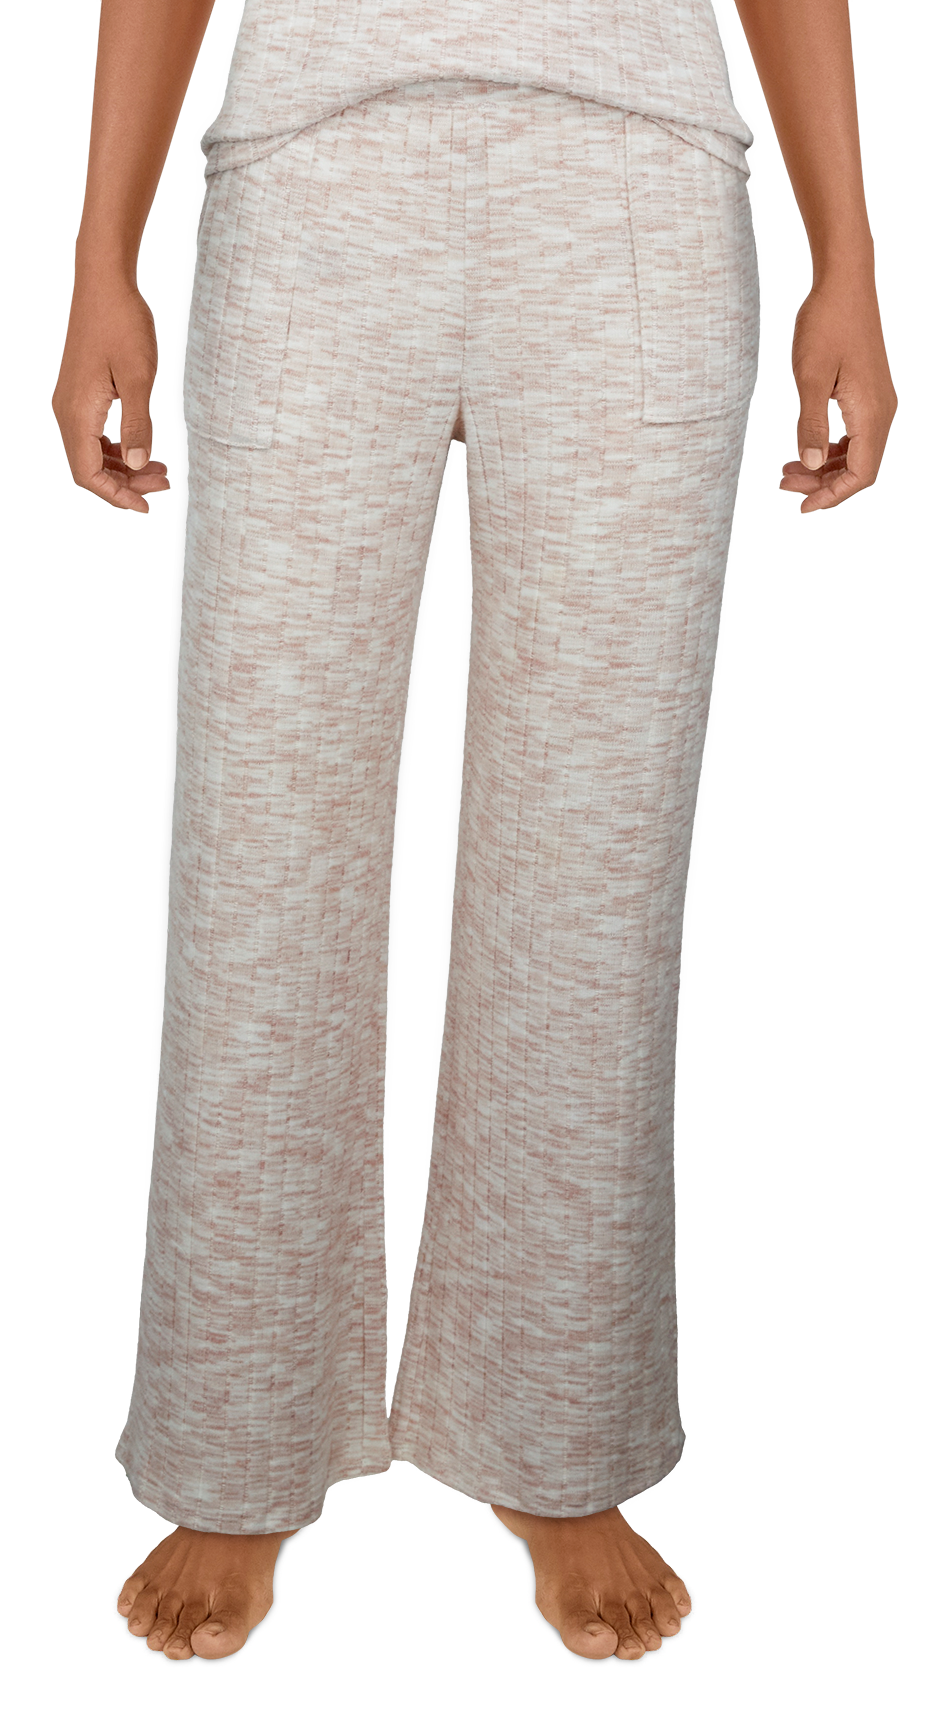 Natural Reflections Sweater-Knit Wide-Leg Lounge Pants for Ladies